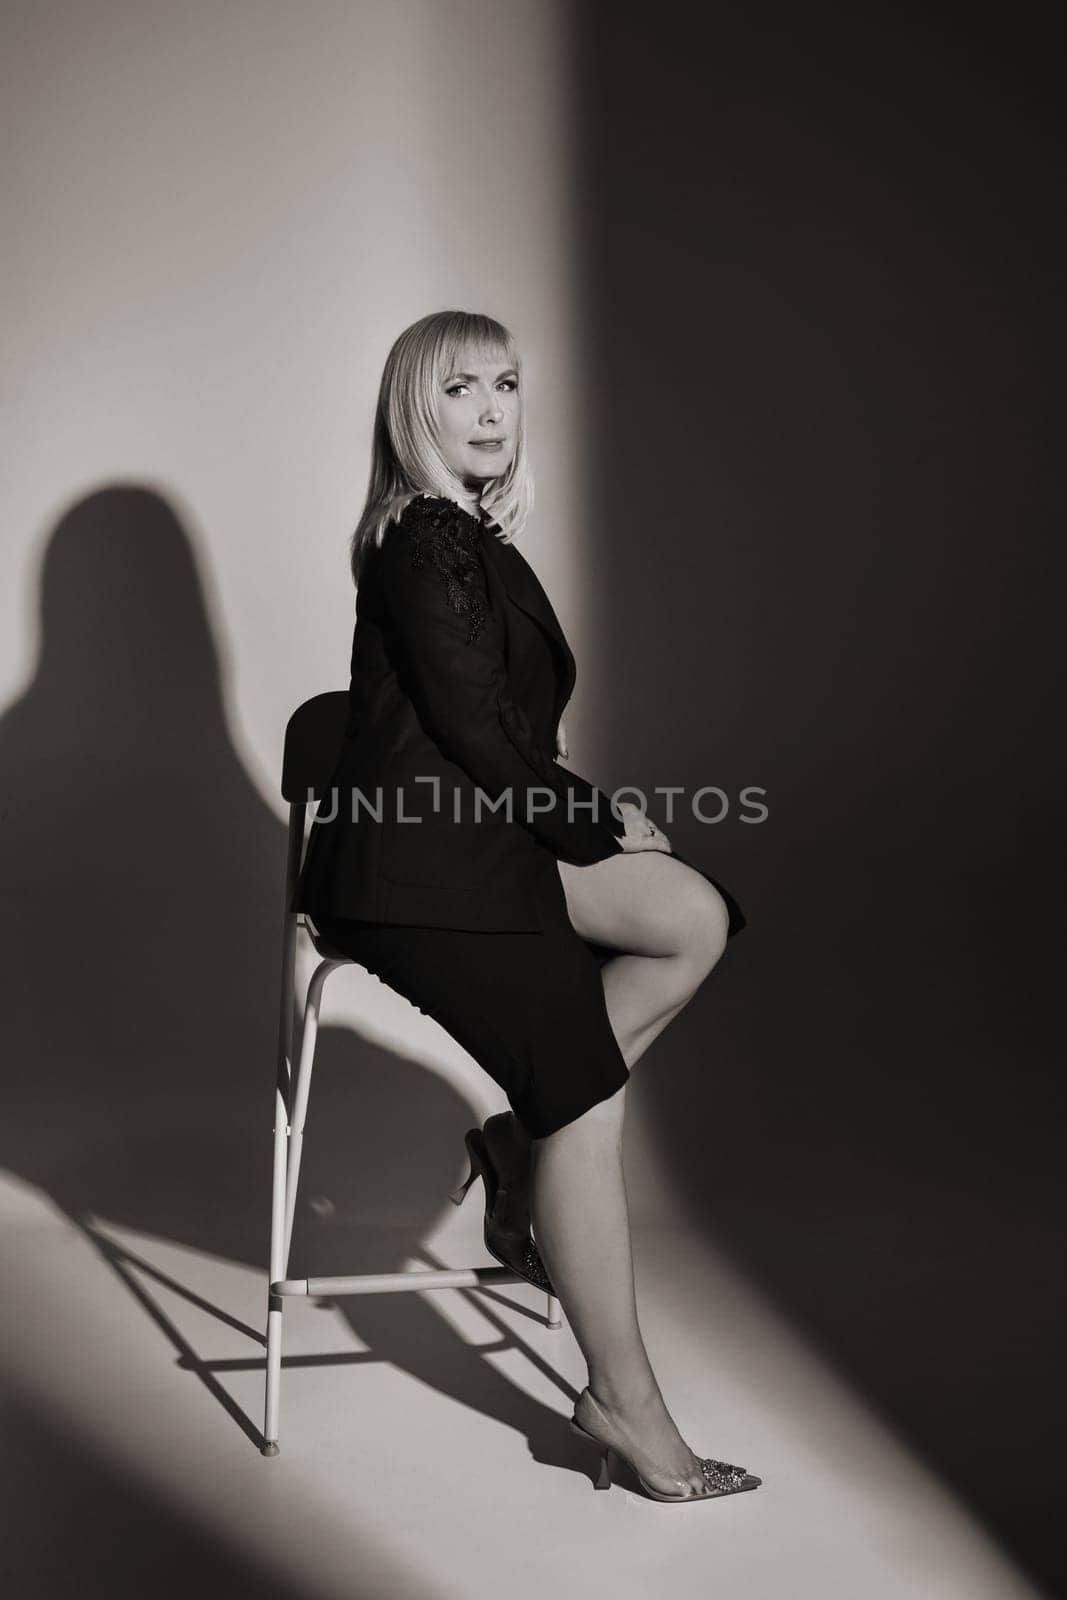 A fashionable woman in a black jacket and dress poses in a studio on a chair.